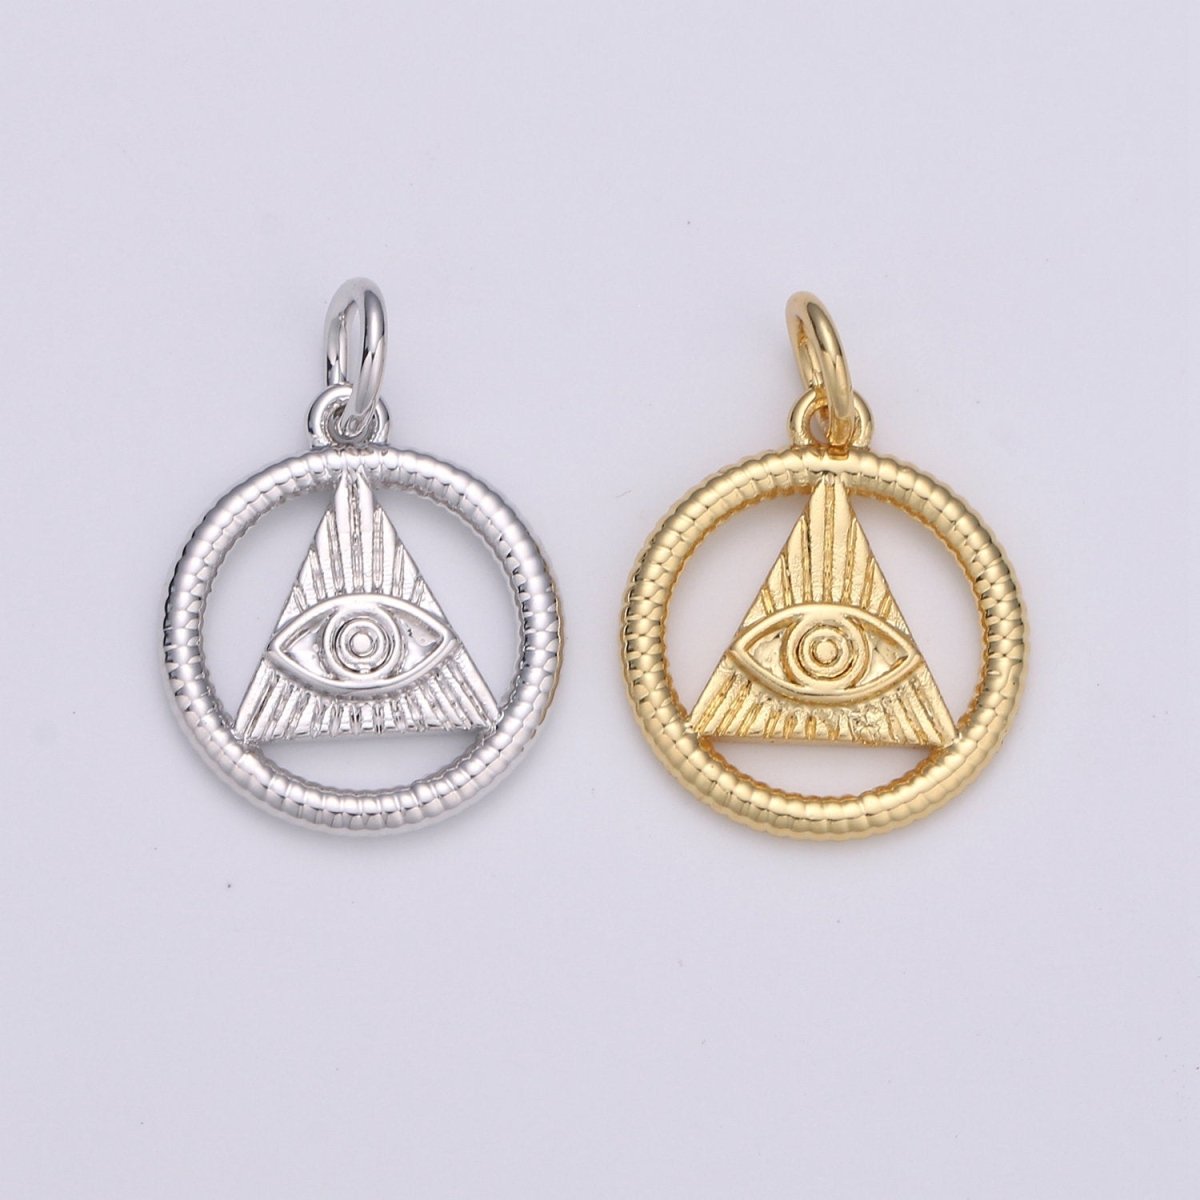 24k Gold and Silver Filled Evil eye Triangle Charm, Circle Evil Eye Charm, , Gold Evil Eye Charm D-540 D-541 - DLUXCA